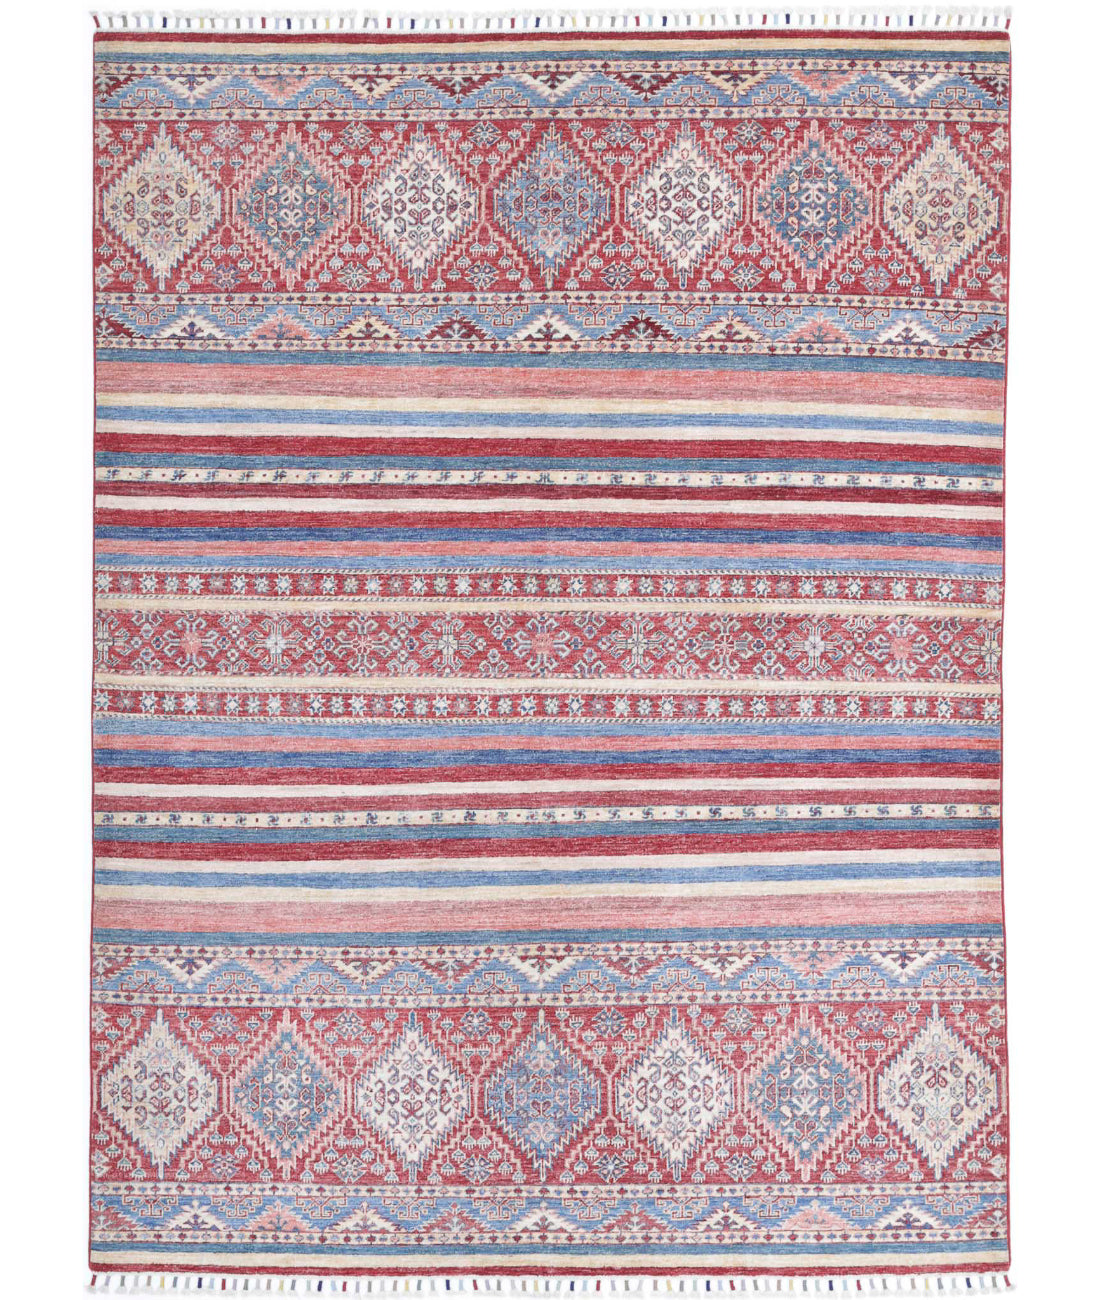 Hand Knotted Khurjeen Wool Rug - 5'8'' x 7'8'' 5'8'' x 7'8'' (170 X 230) / Multi / Red